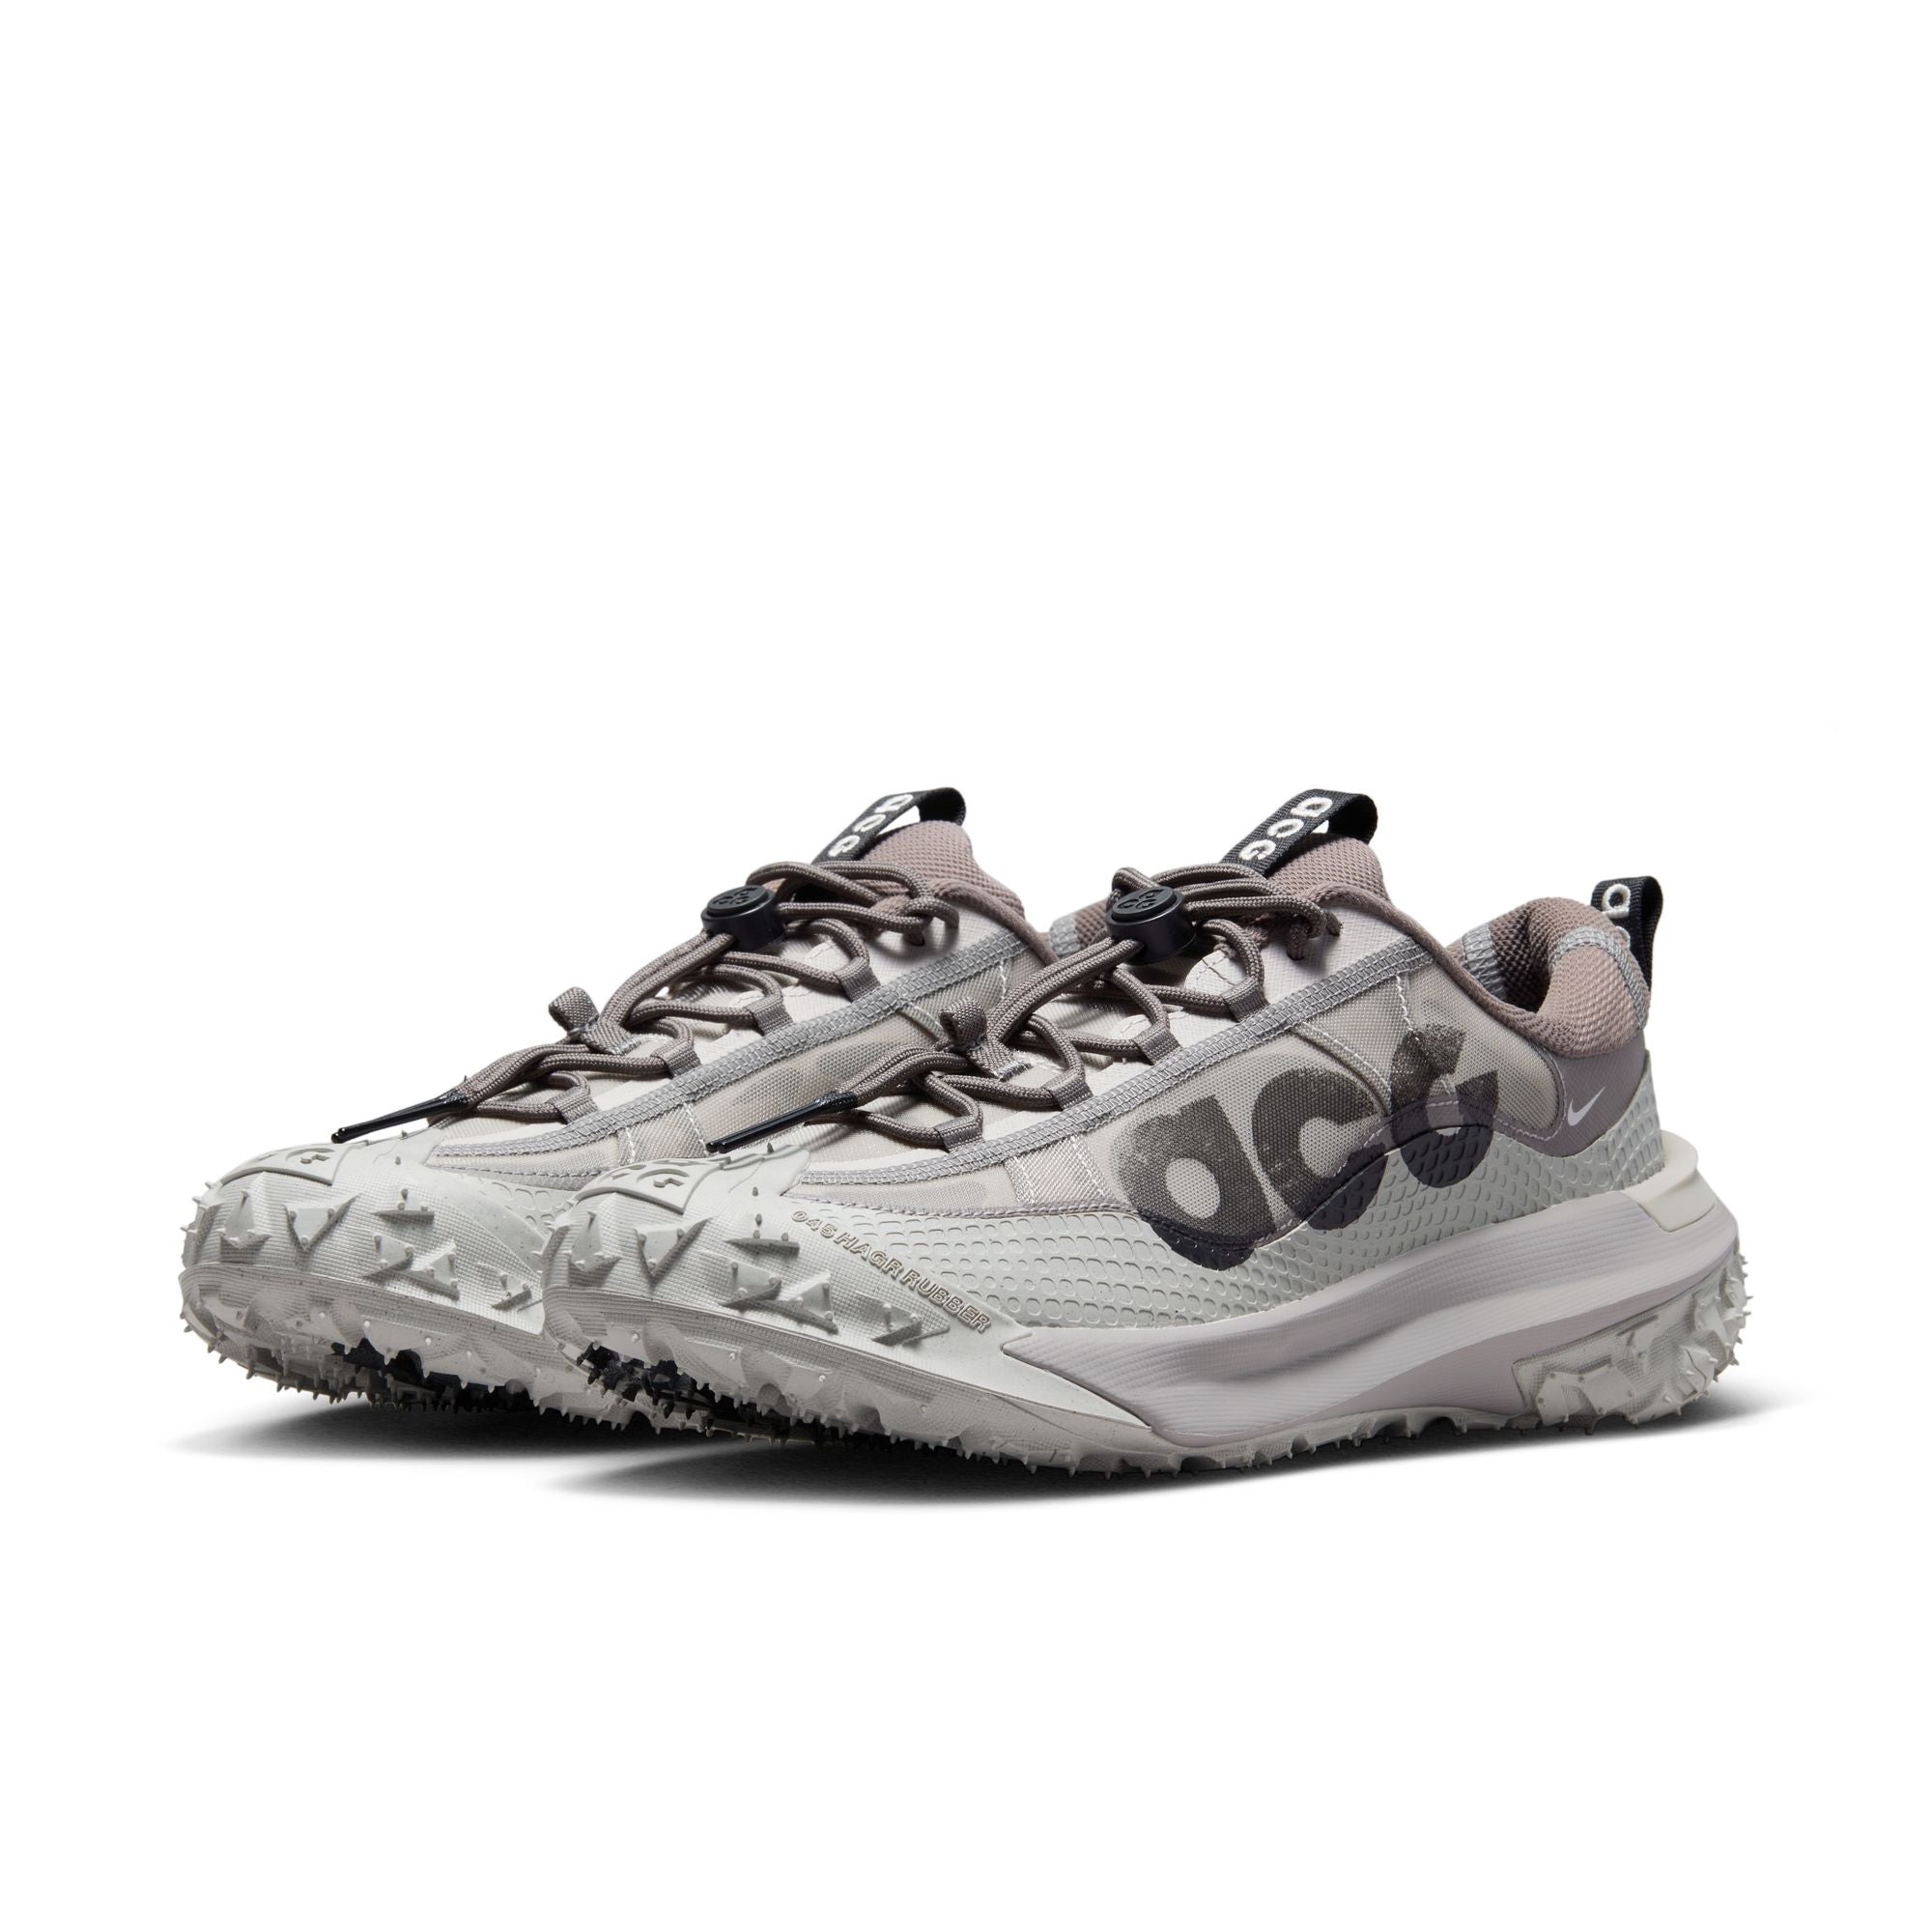 ACG MOUNTAIN FLY 2 LOW